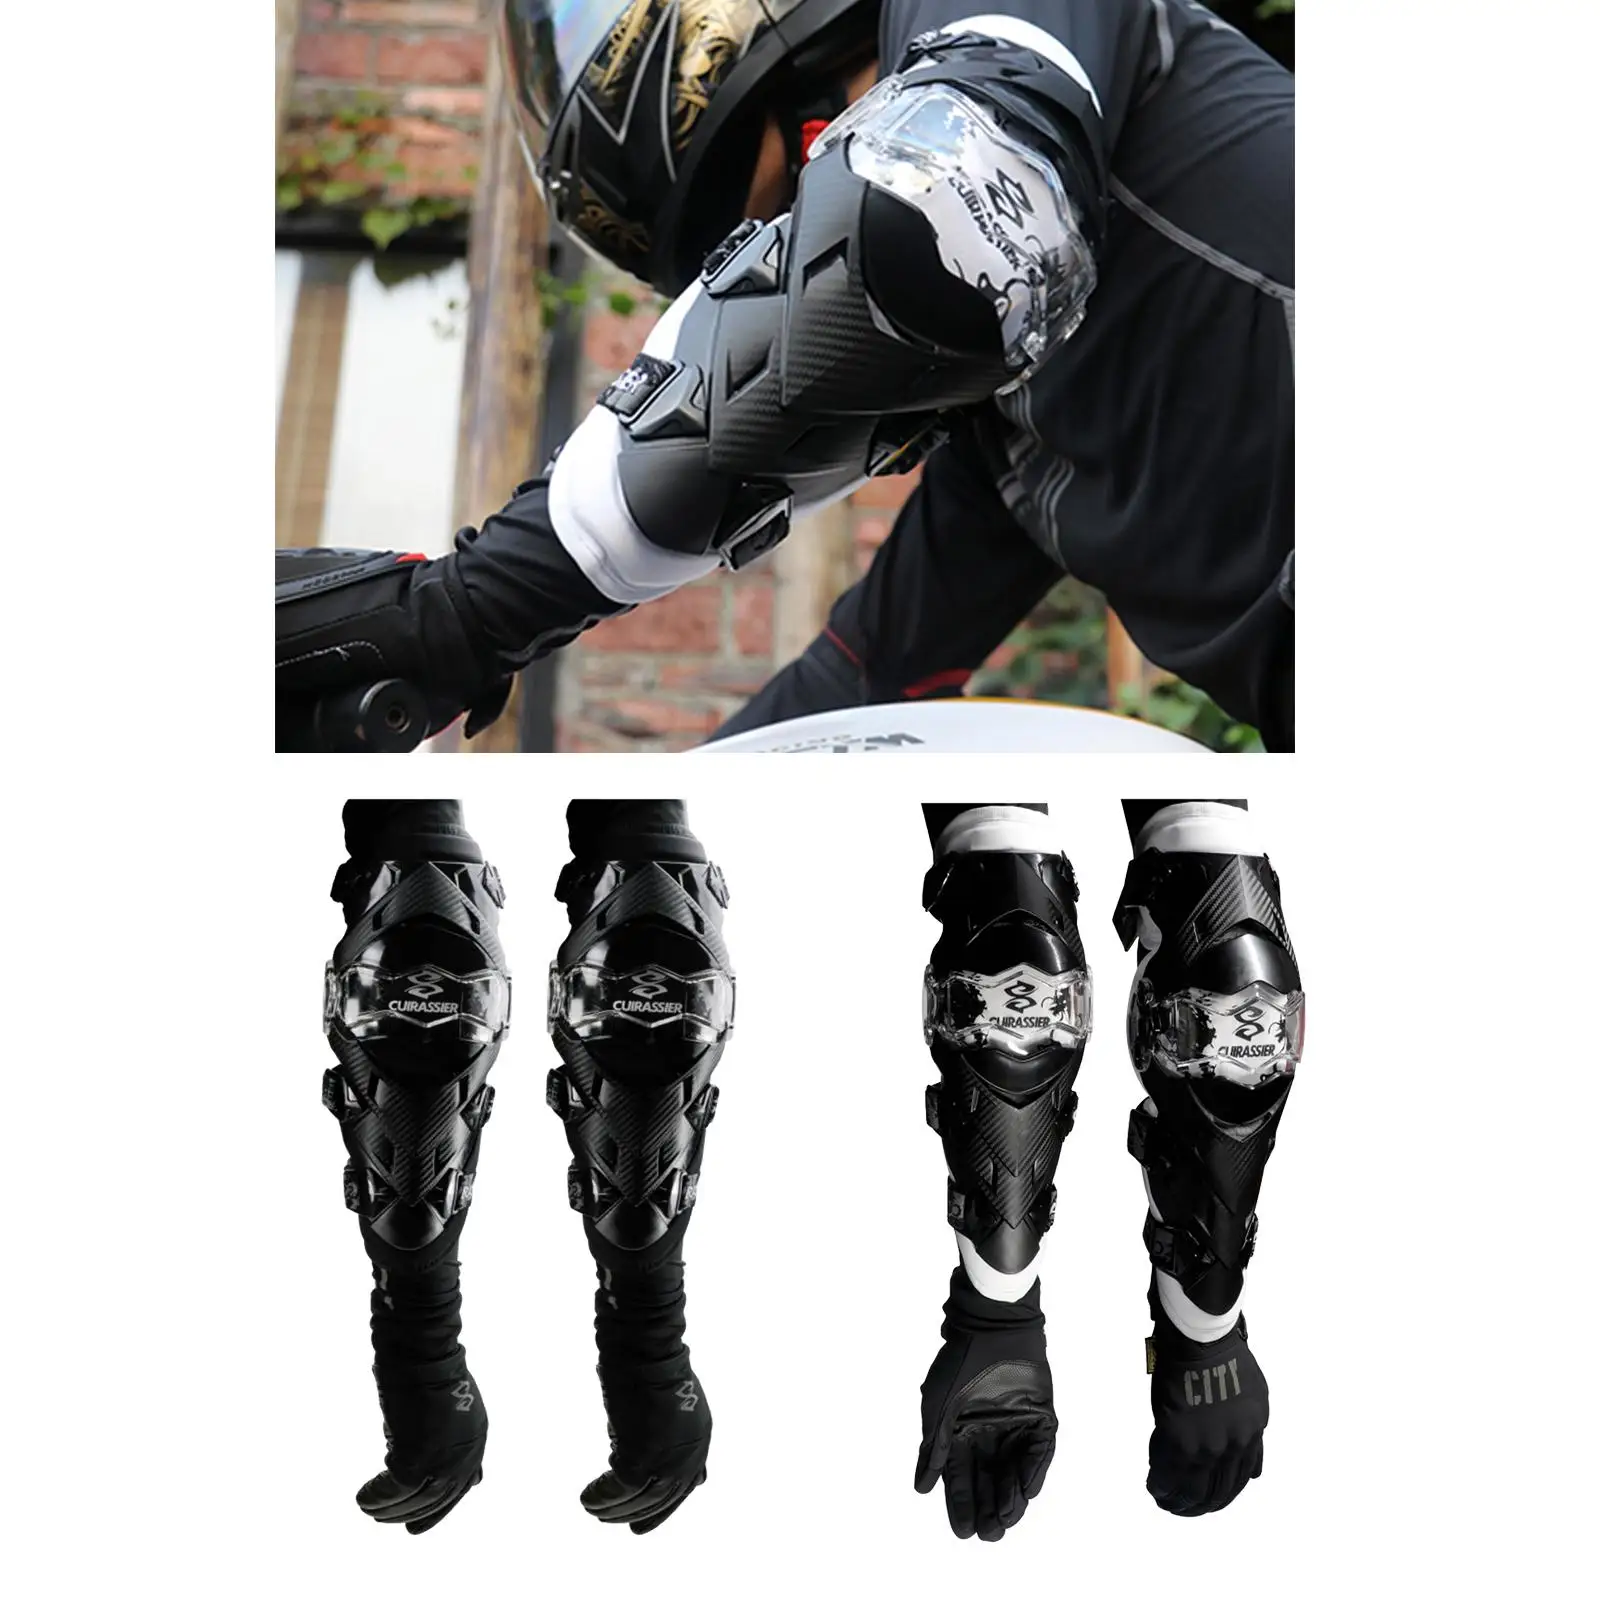 Motorcycle Elbow Protector,Cuirassier Elbow Pads E09 Motocross Off-Road Racing Downhill Dirt Bike Protection Elbow Guards Black